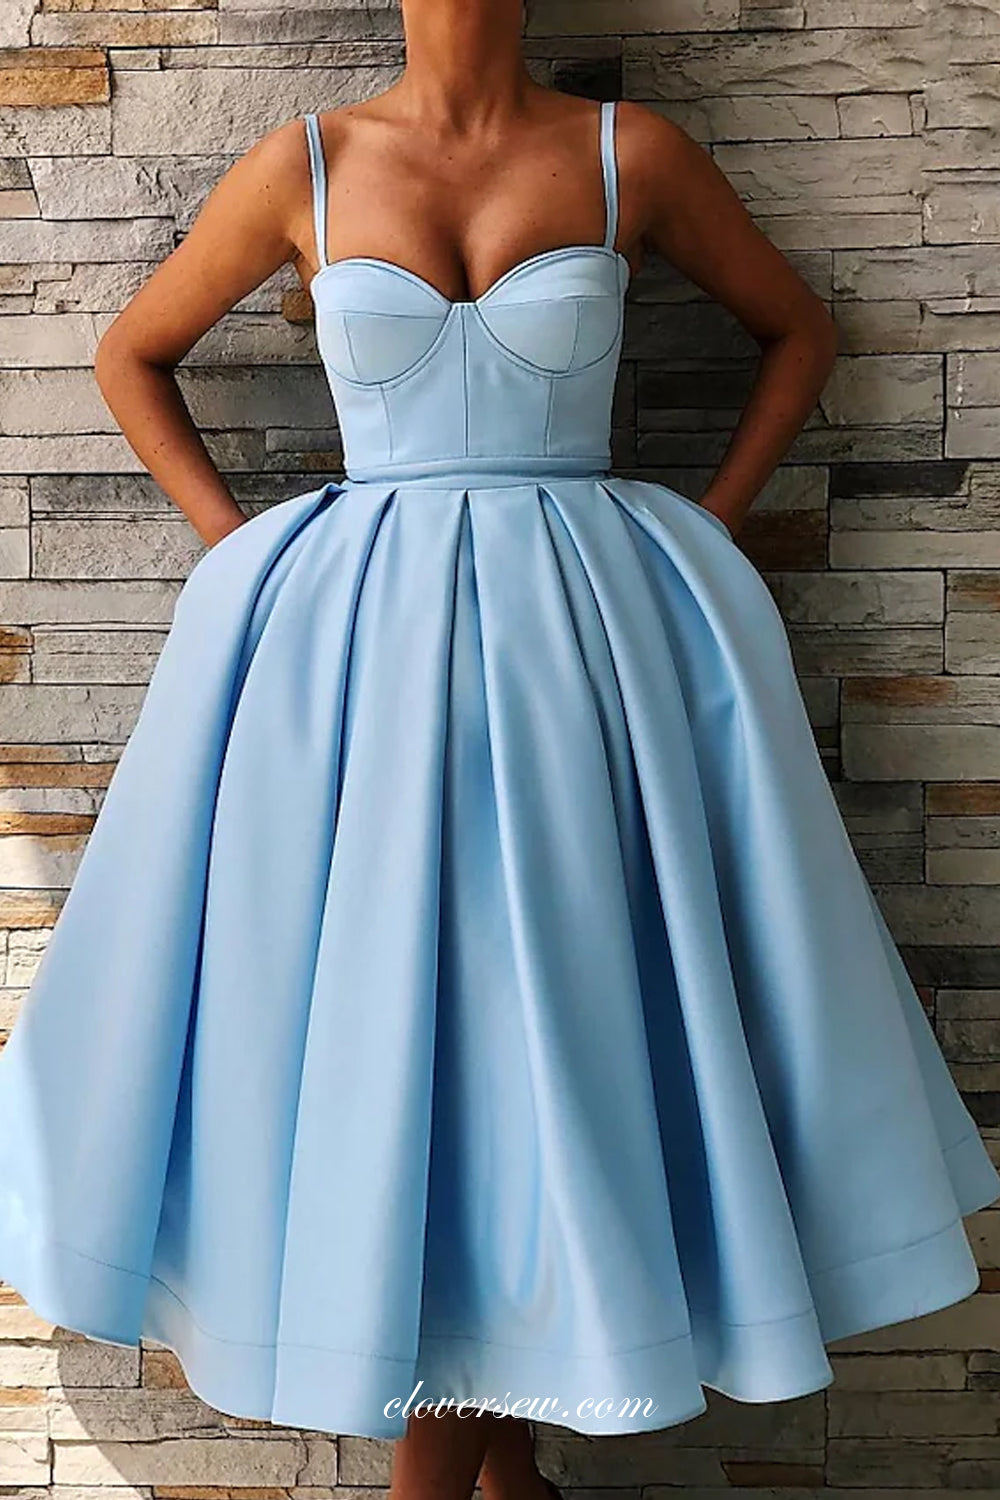 Pale Blue Satin Sleeveless Cocktail Party Dresses Homecoming Dresses, CH0033